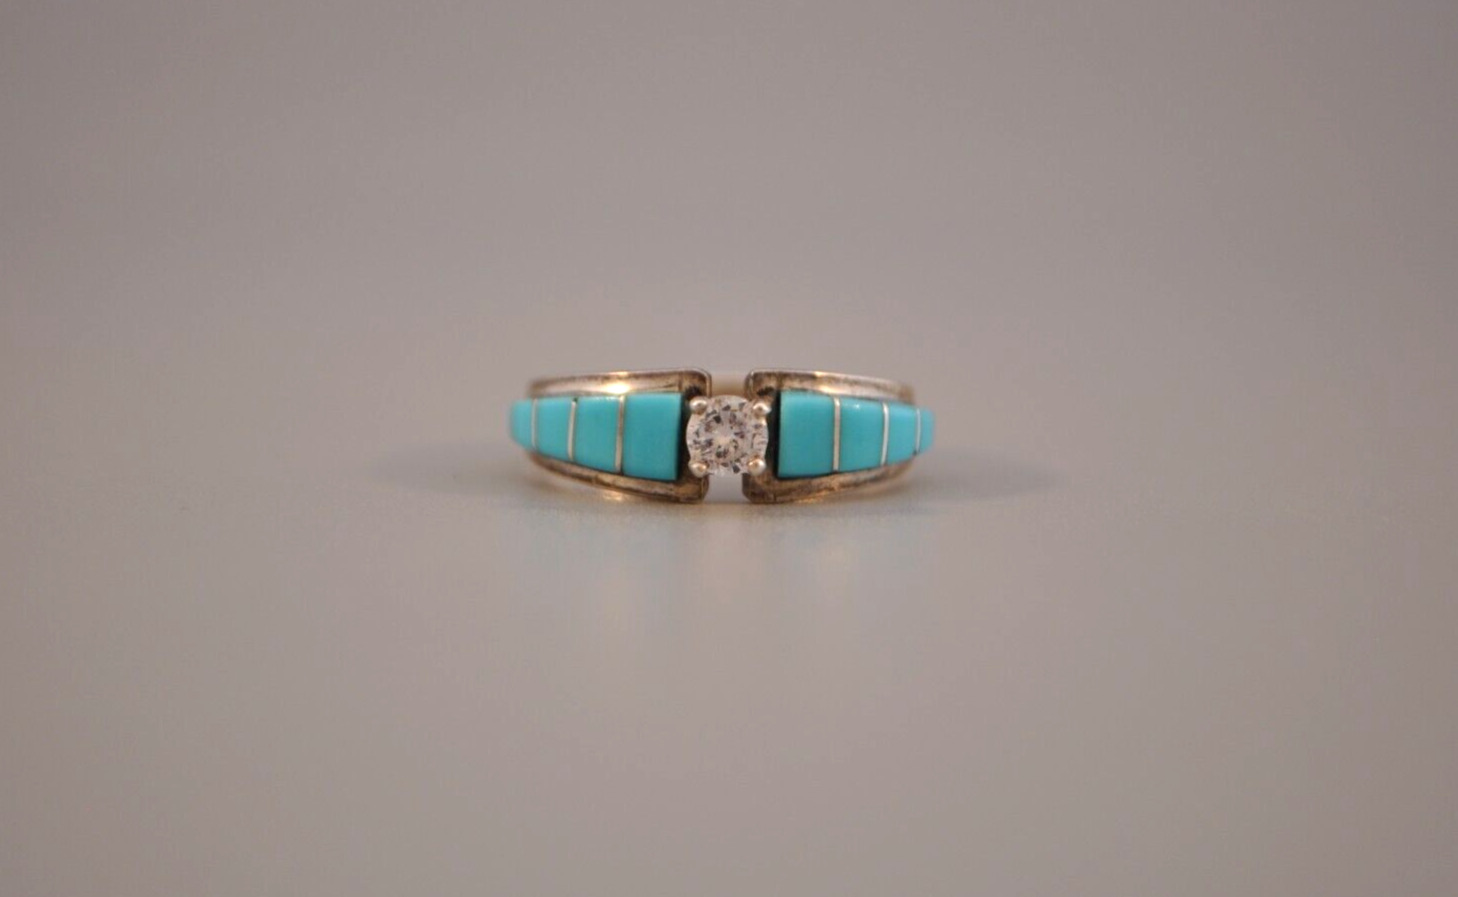 Vintage Navajo Sterling Silver Ring - Turquoise and CZ Signed MJS ..Size 6 1/2